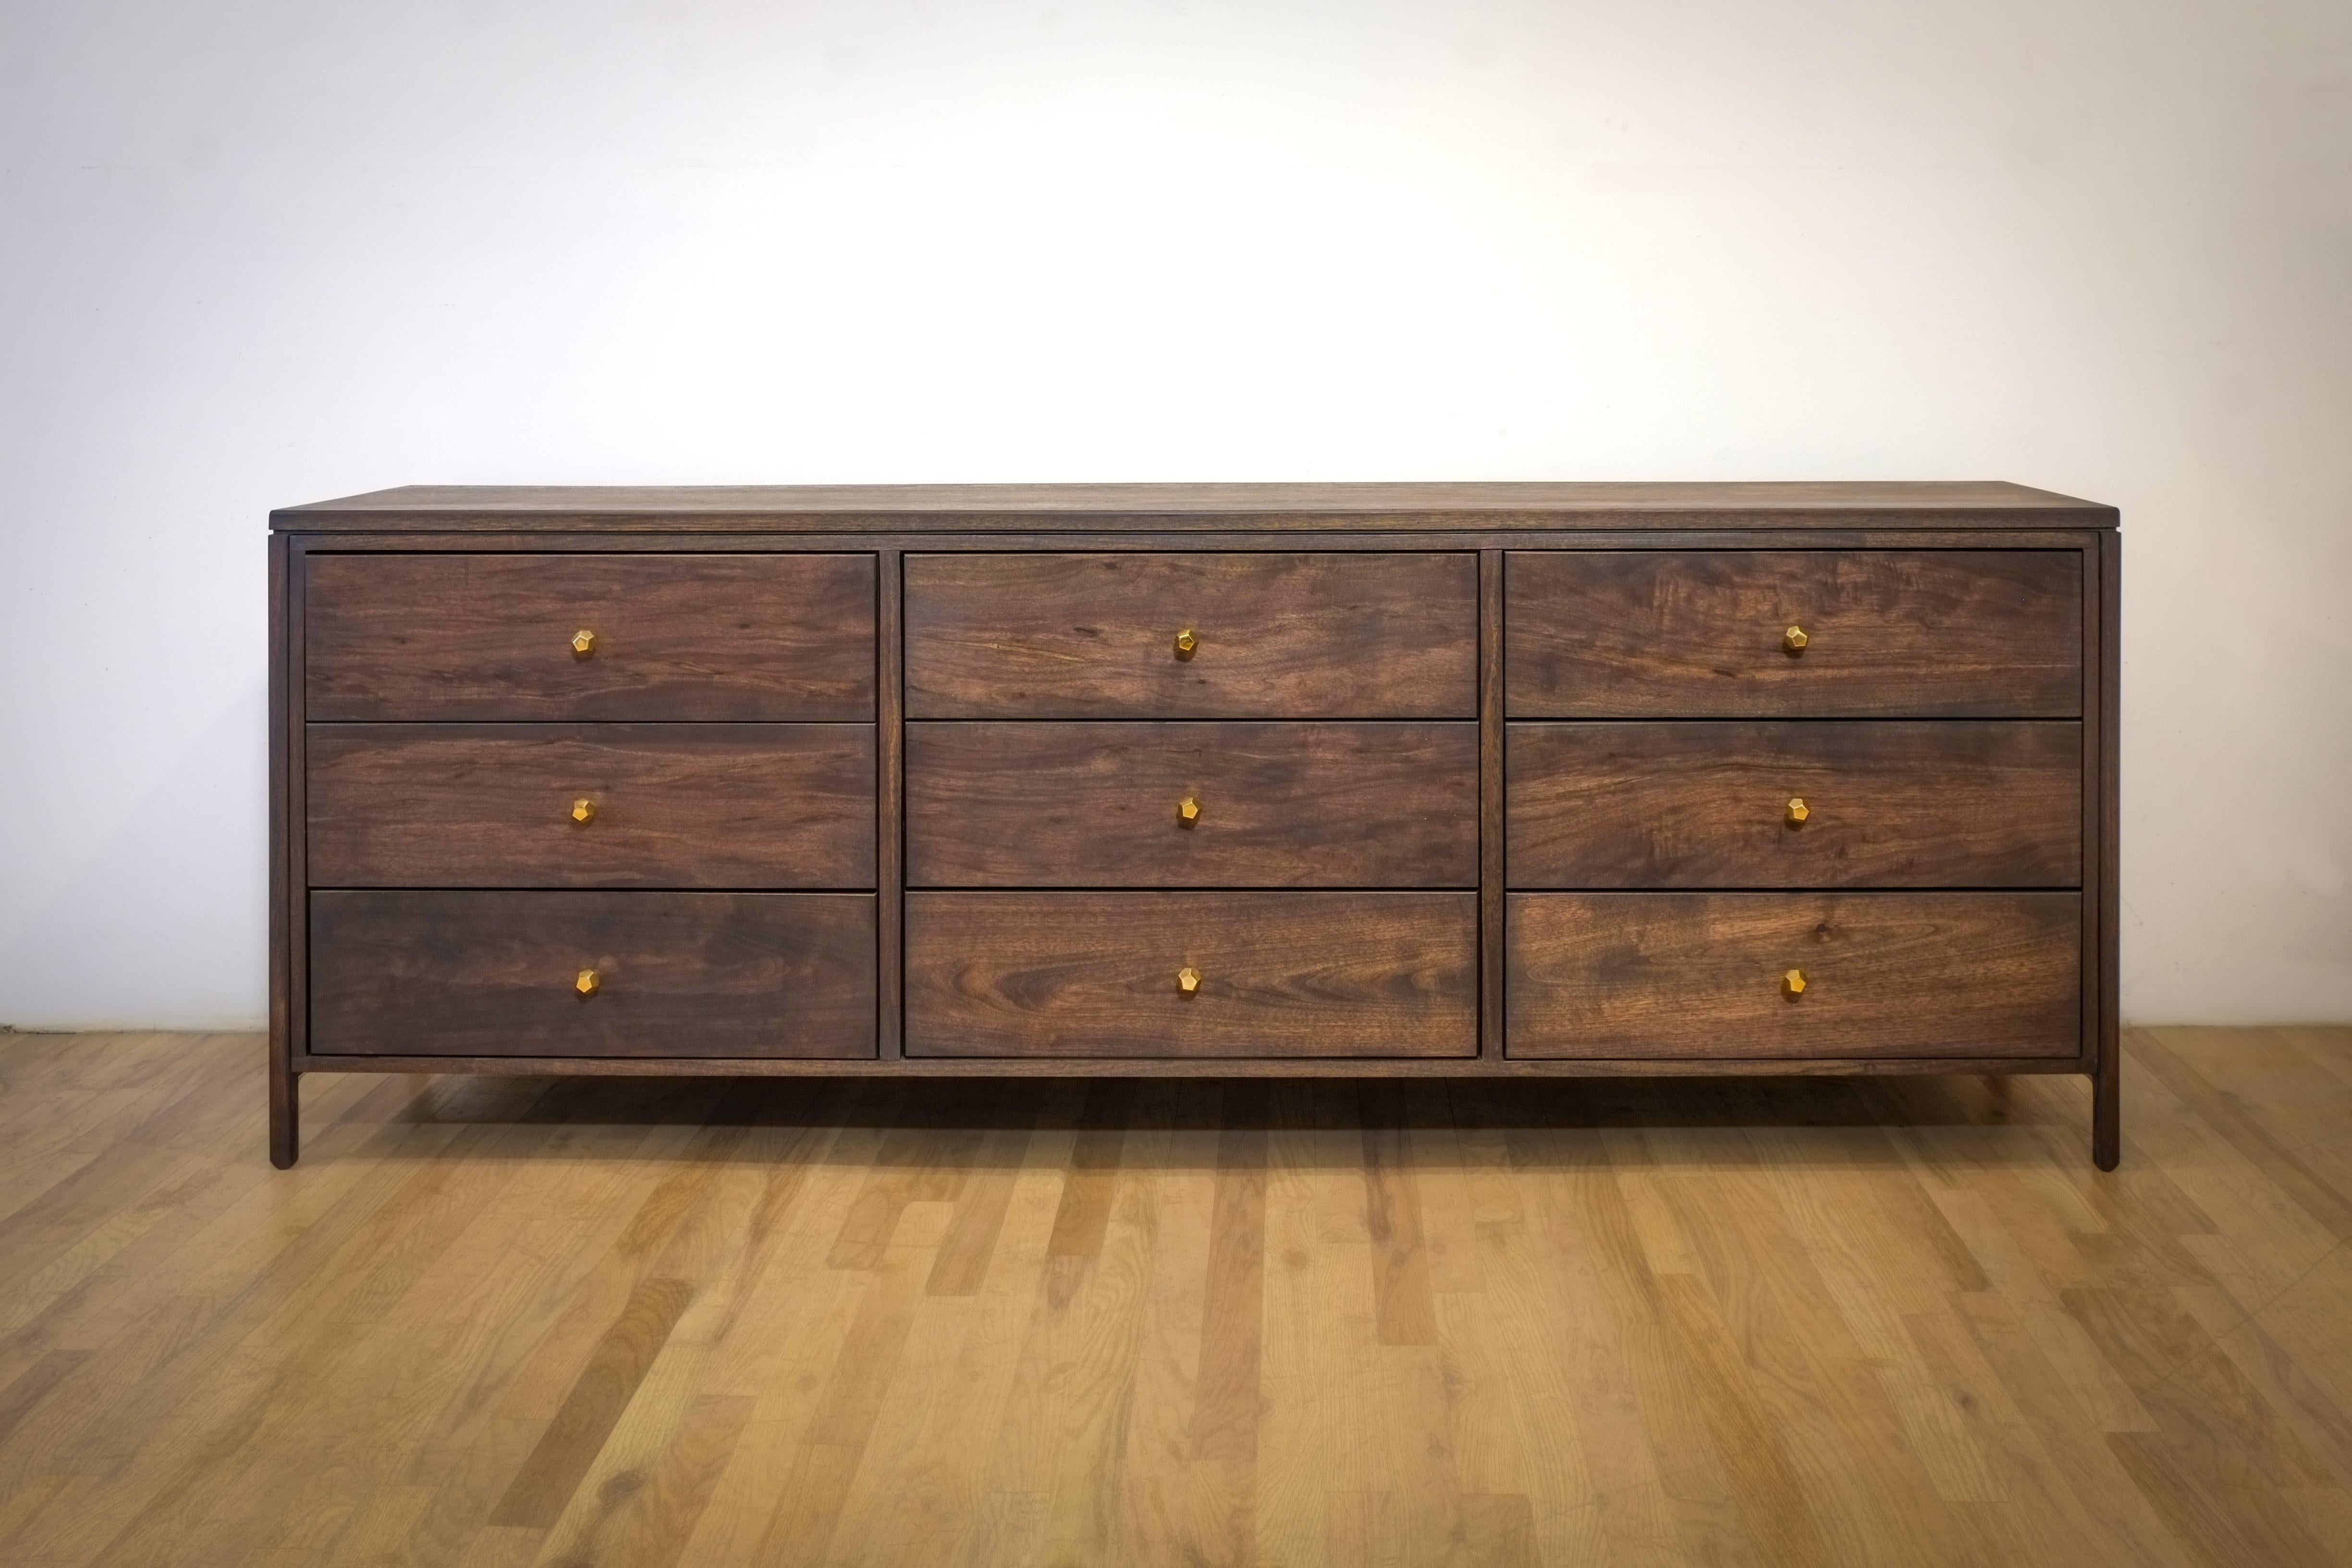 The Boston Dresser is a double book-matched piece with luscious drawers in dark walnut. Round over void edges with a cantilevered belly on slender legs. 
Mostly constructed in solid walnut this piece will be a heavyweight in whatever setting you